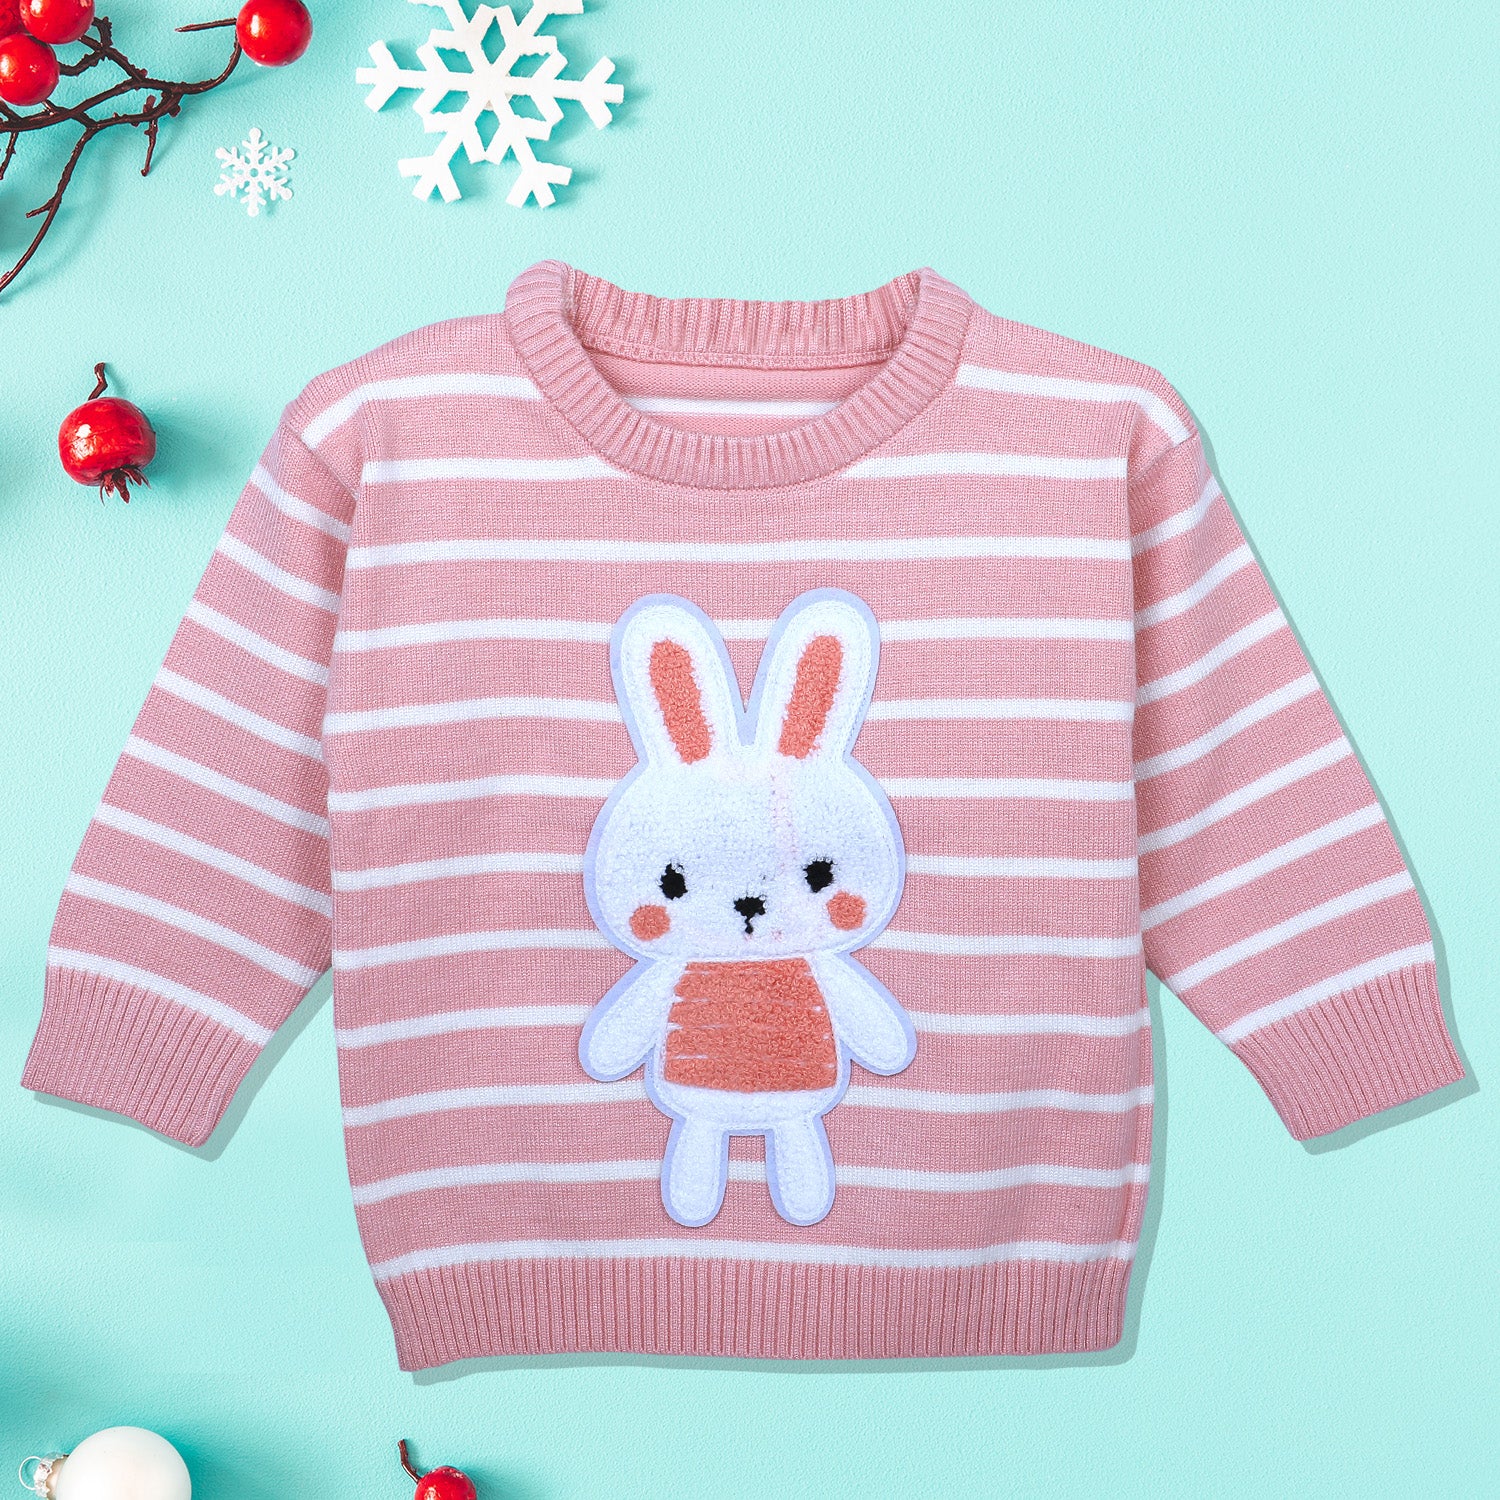 Hopping Rabbit Striped Premium Full Sleeves Knitted Sweater - Pink